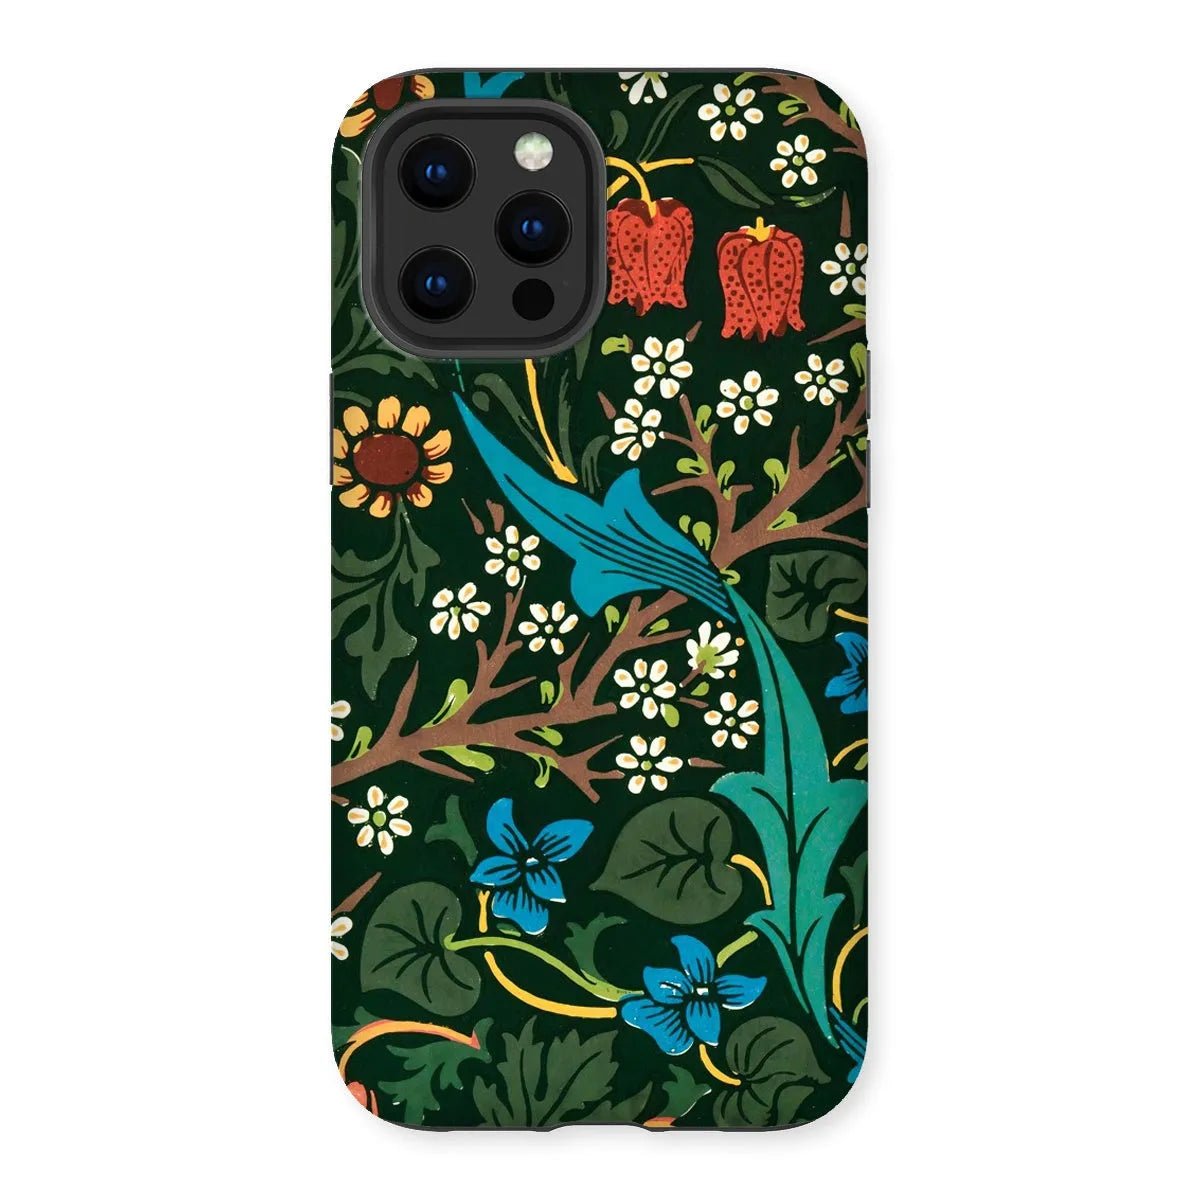 Blackthorn Hawthorn - Floral Phone Case - William Morris - Iphone 12 Pro Max / Matte - Mobile Phone Cases - Aesthetic